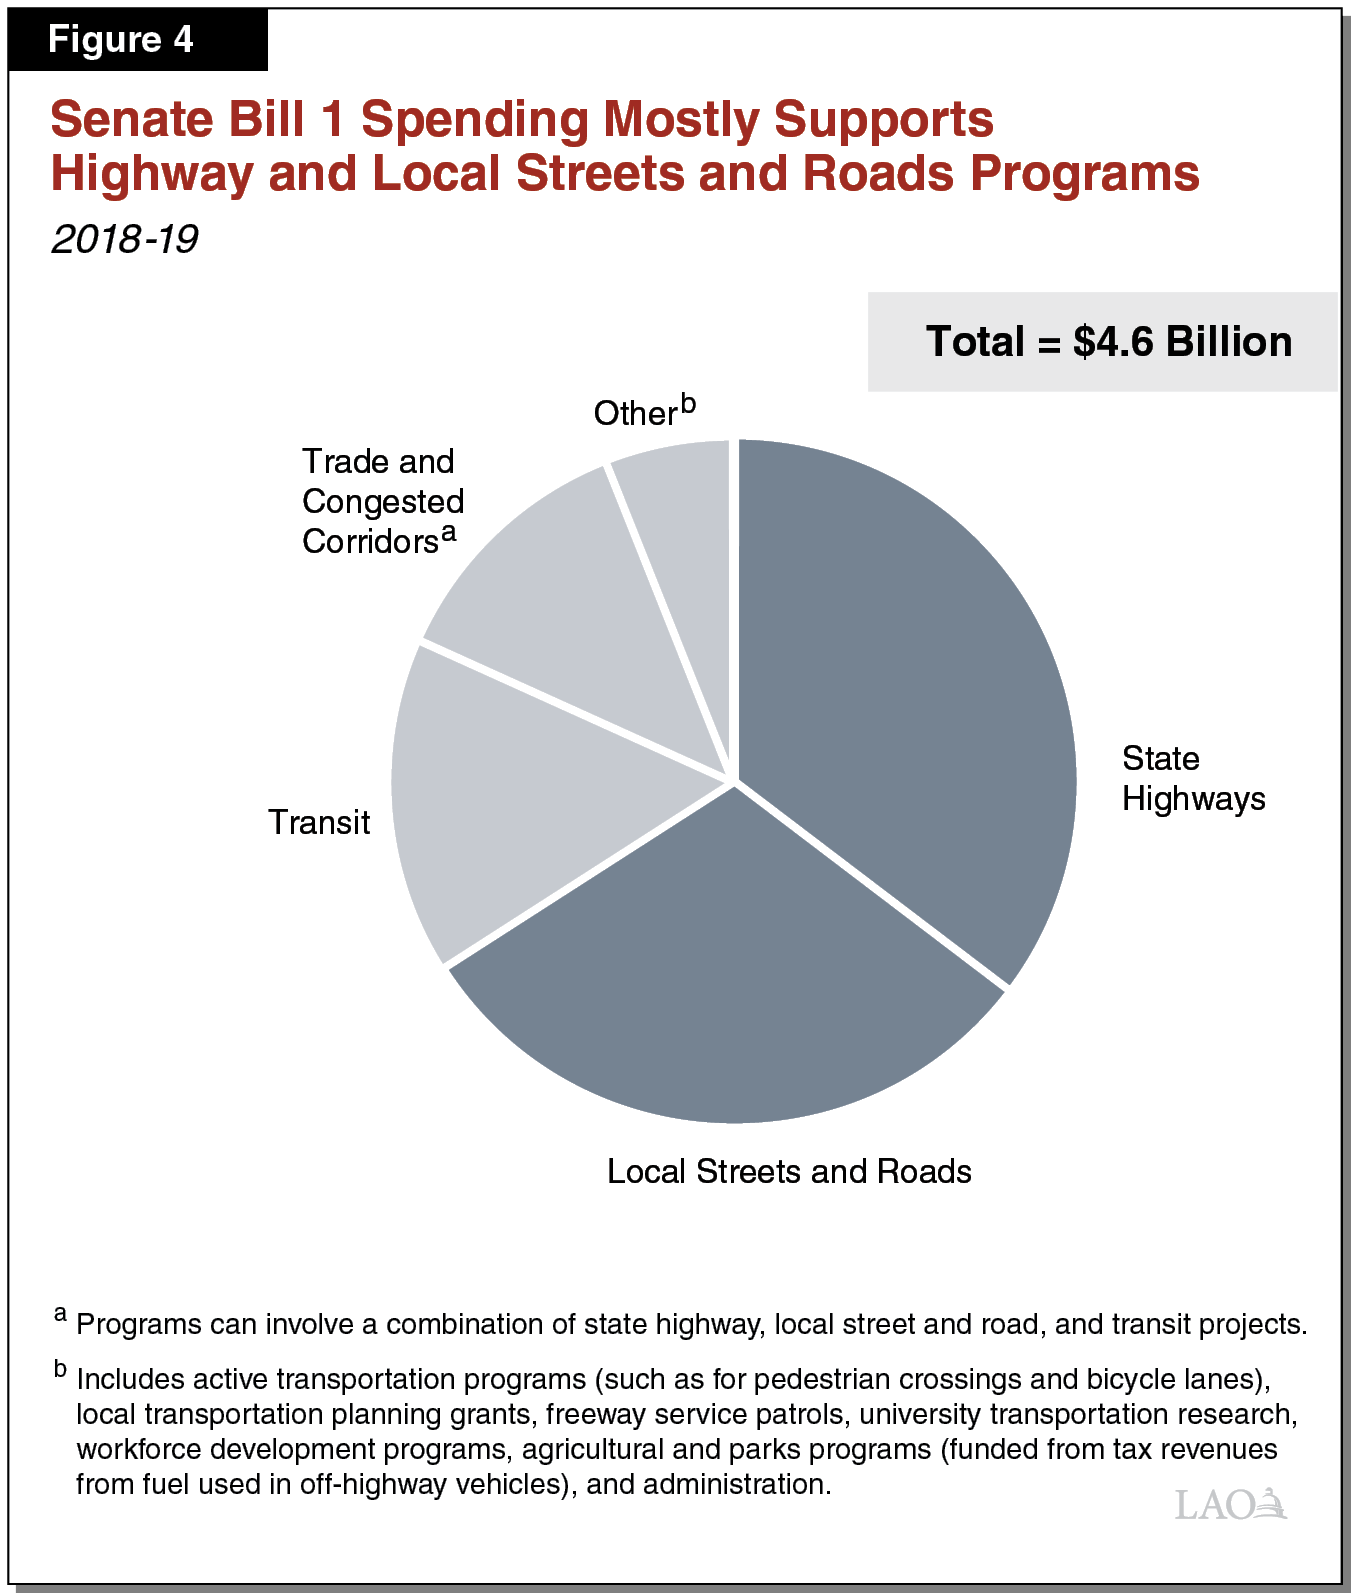 Figure 4 - Senate Bill 1 Spending Mostly Supports Highway and Local Streets and Roads Programs